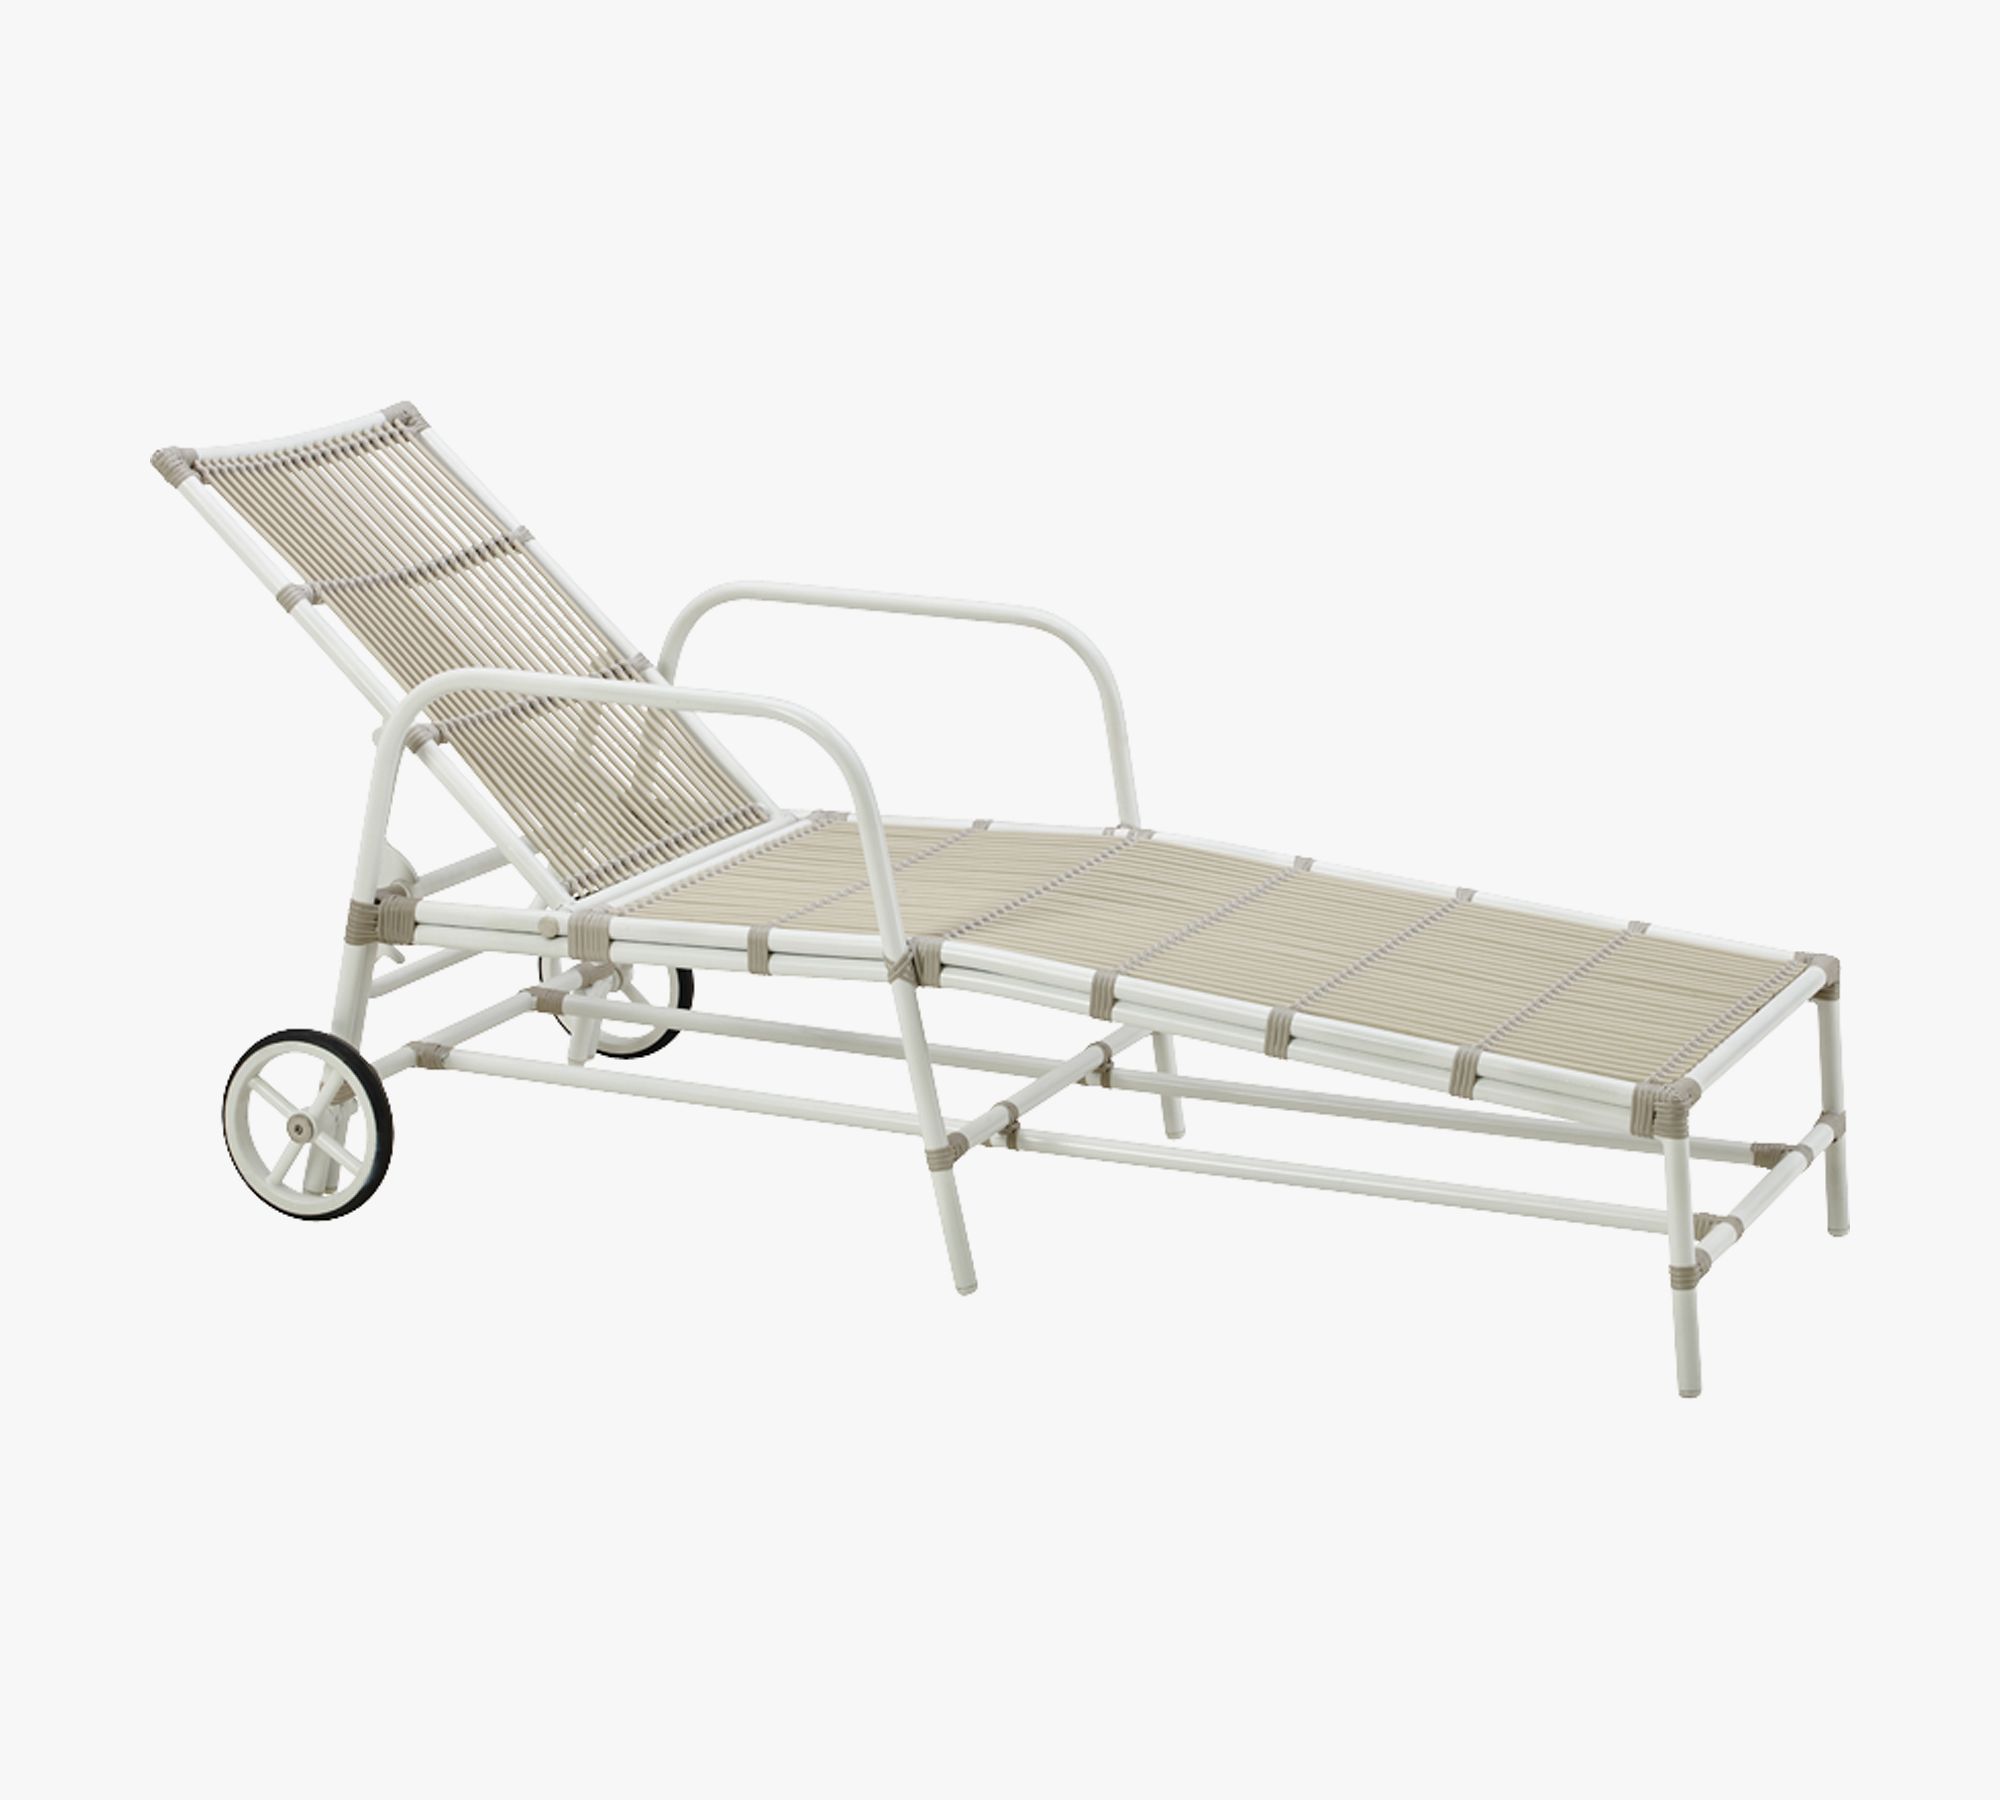 Josephine Indoor/Outdoor Chaise Lounge with Wheels